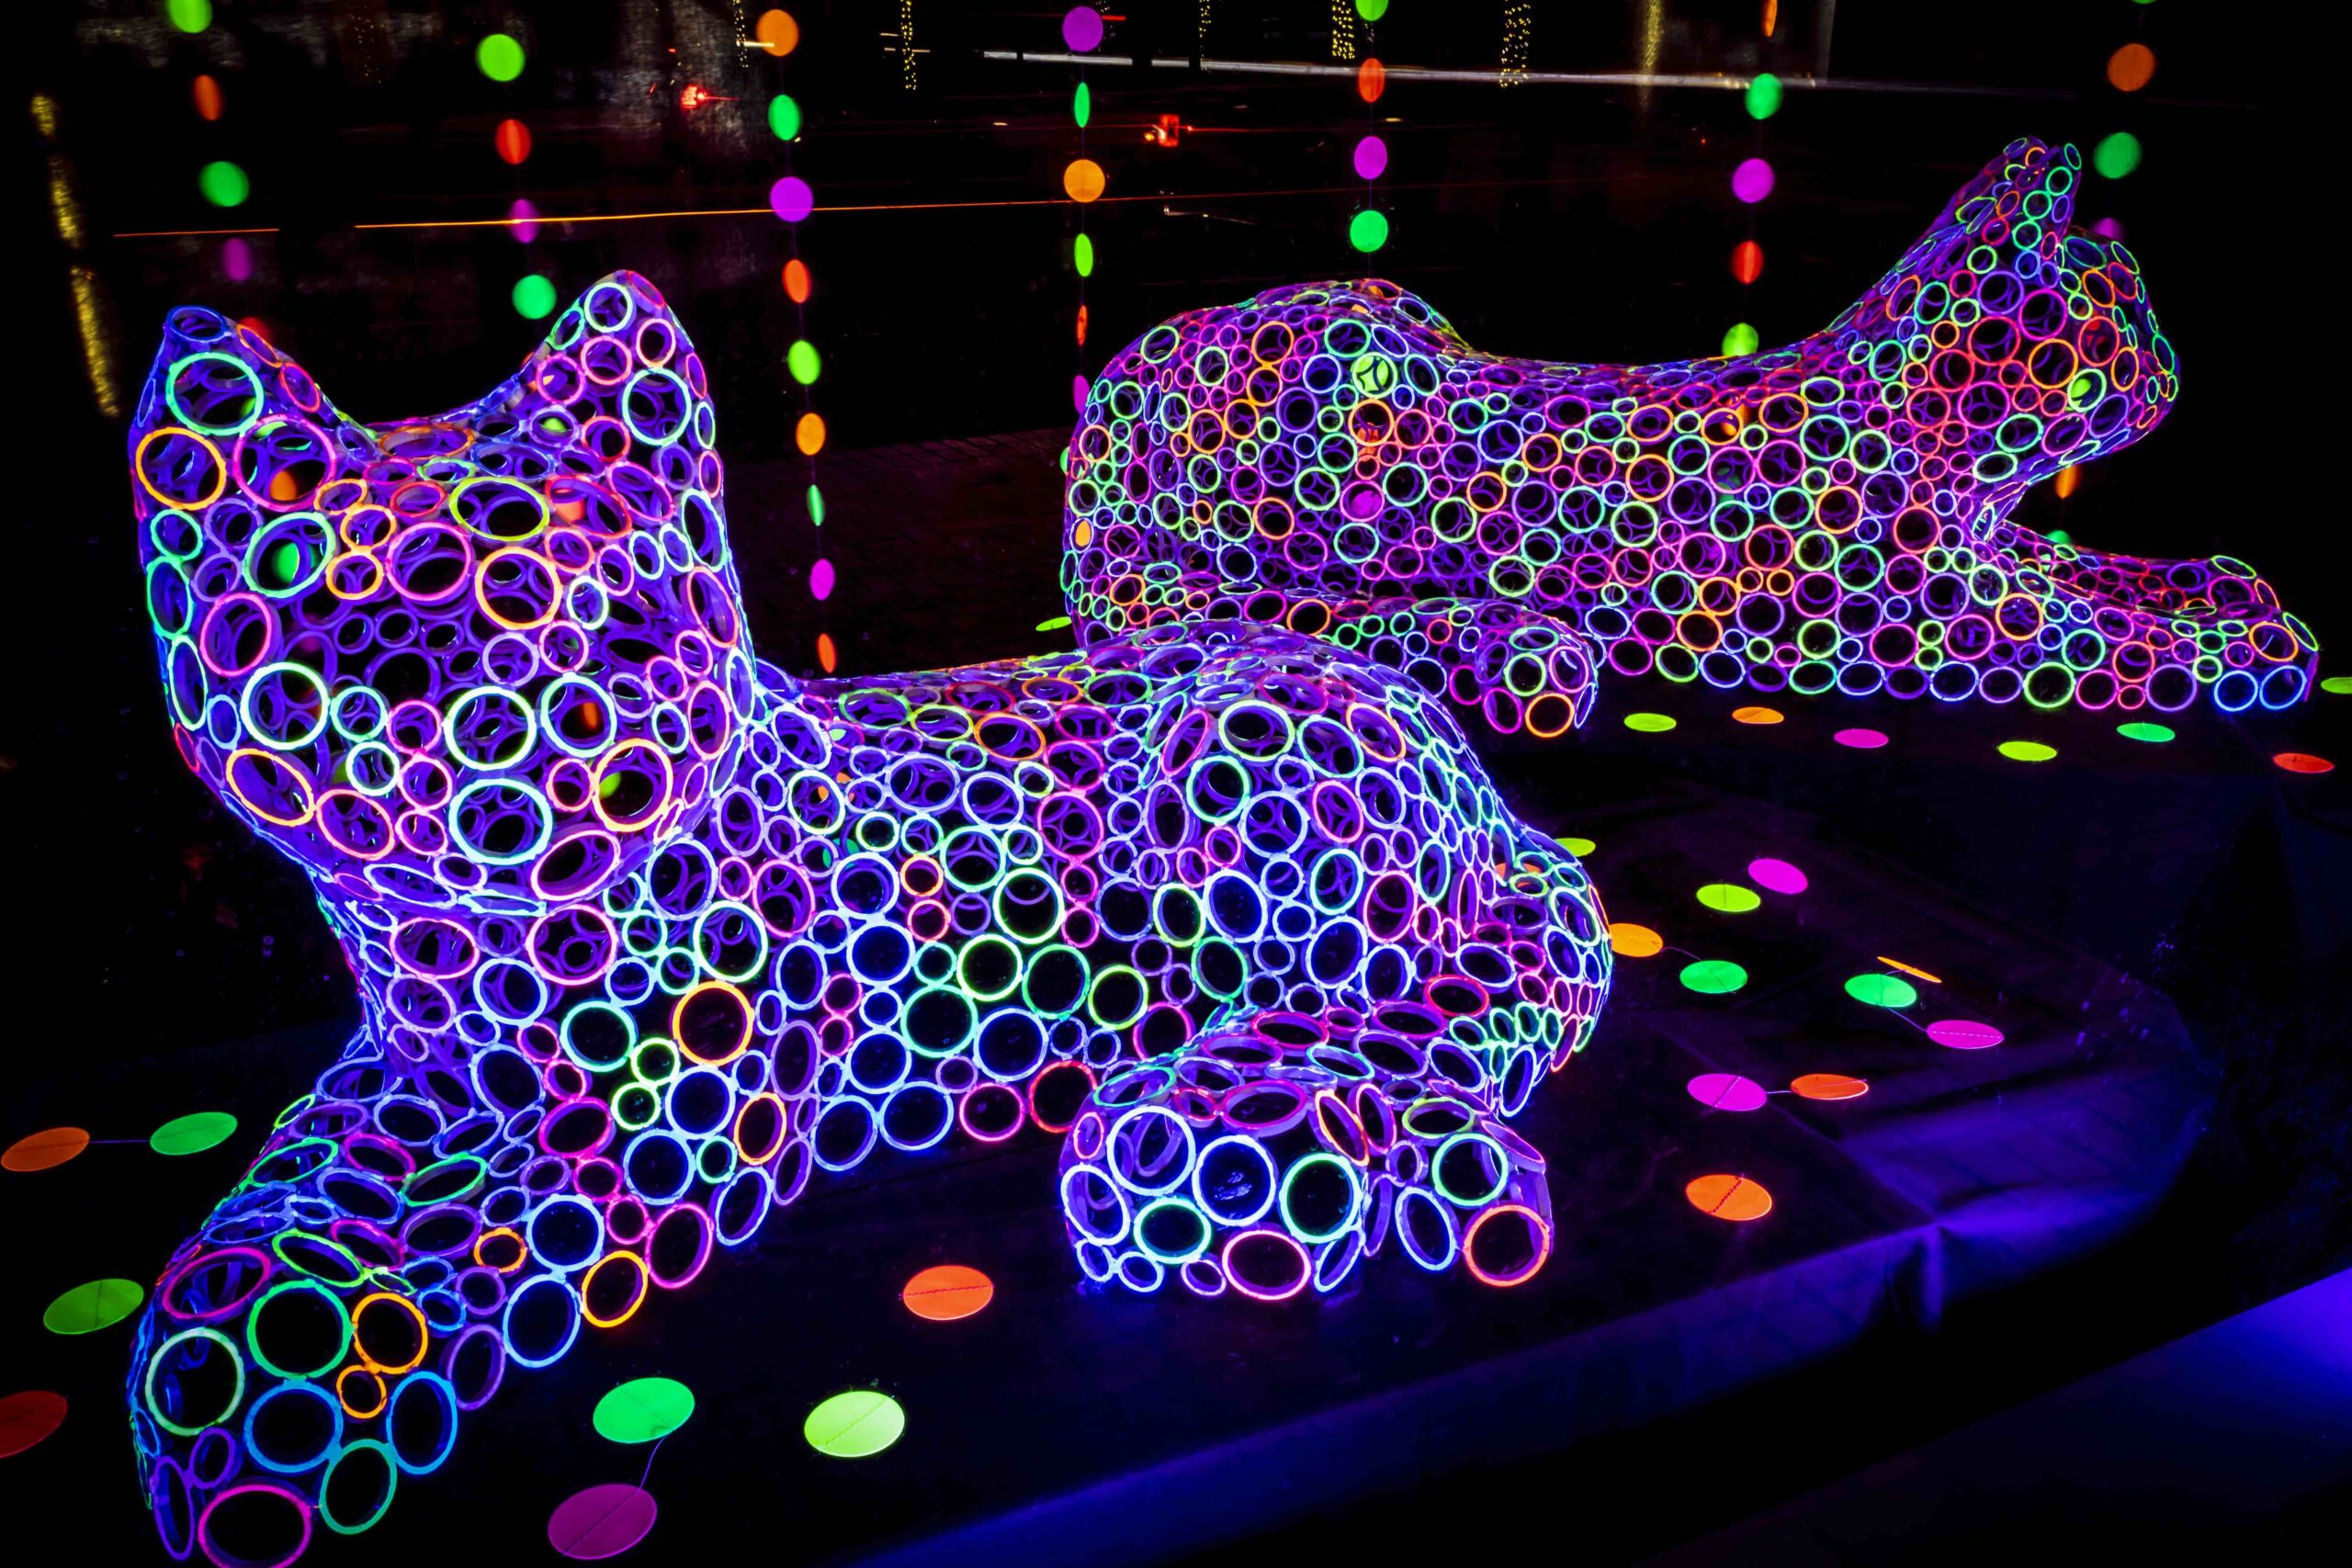 Photograph of the Glow Cats art piece by Paige Tashner